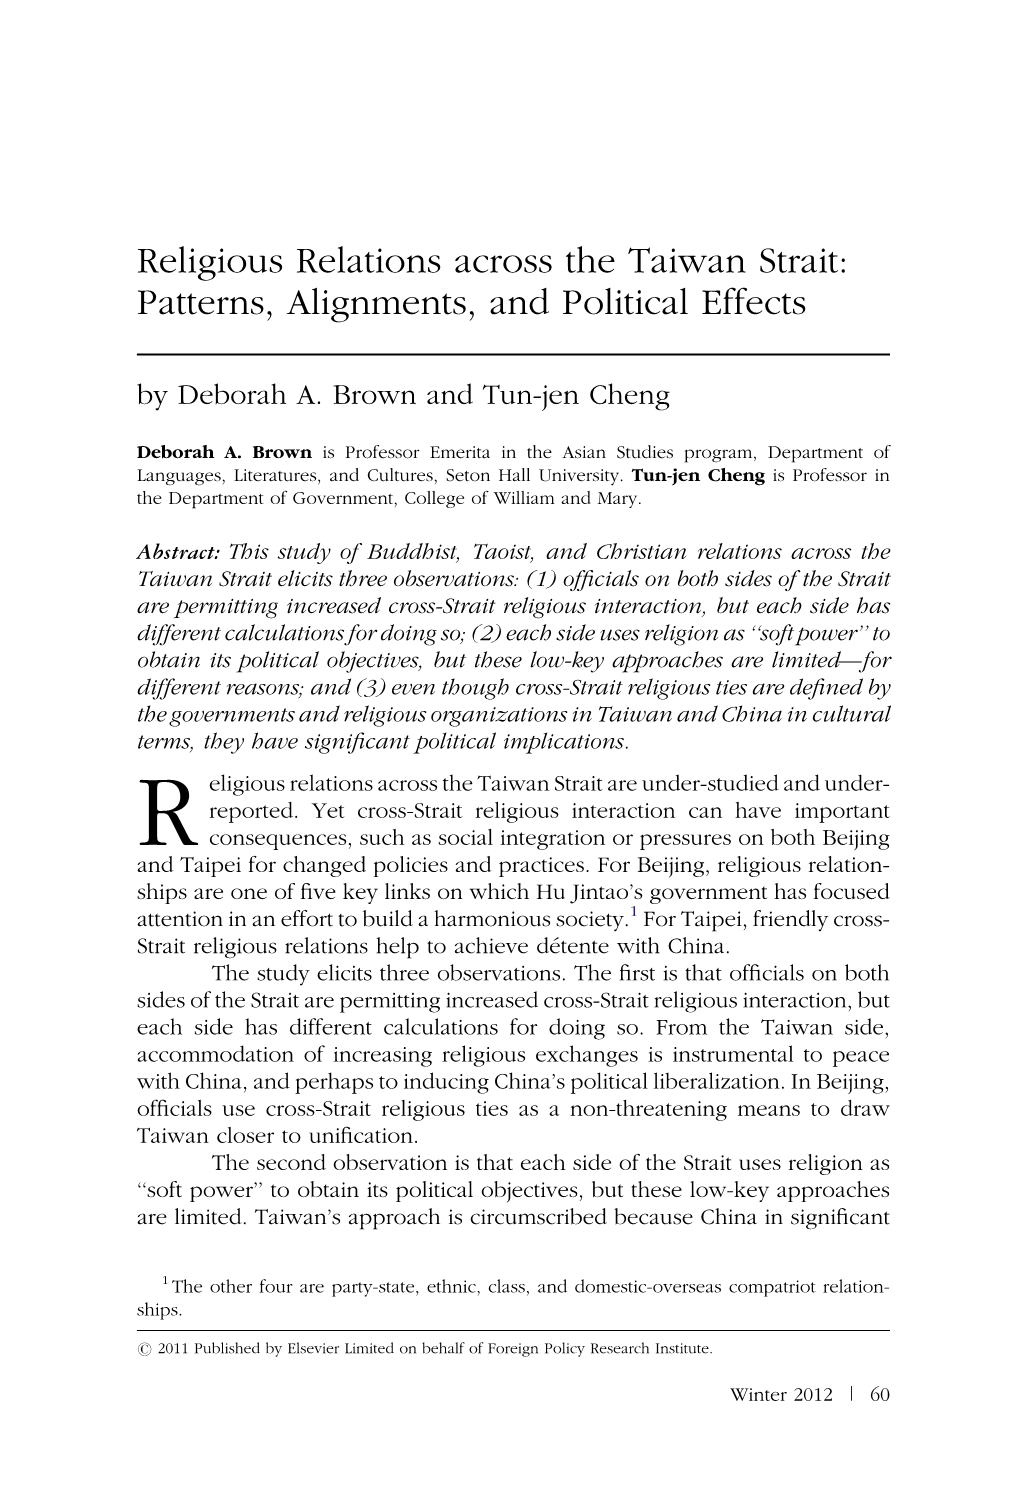 Religious Relations Across the Taiwan Strait: Patterns, Alignments, and Political Effects by Deborah A